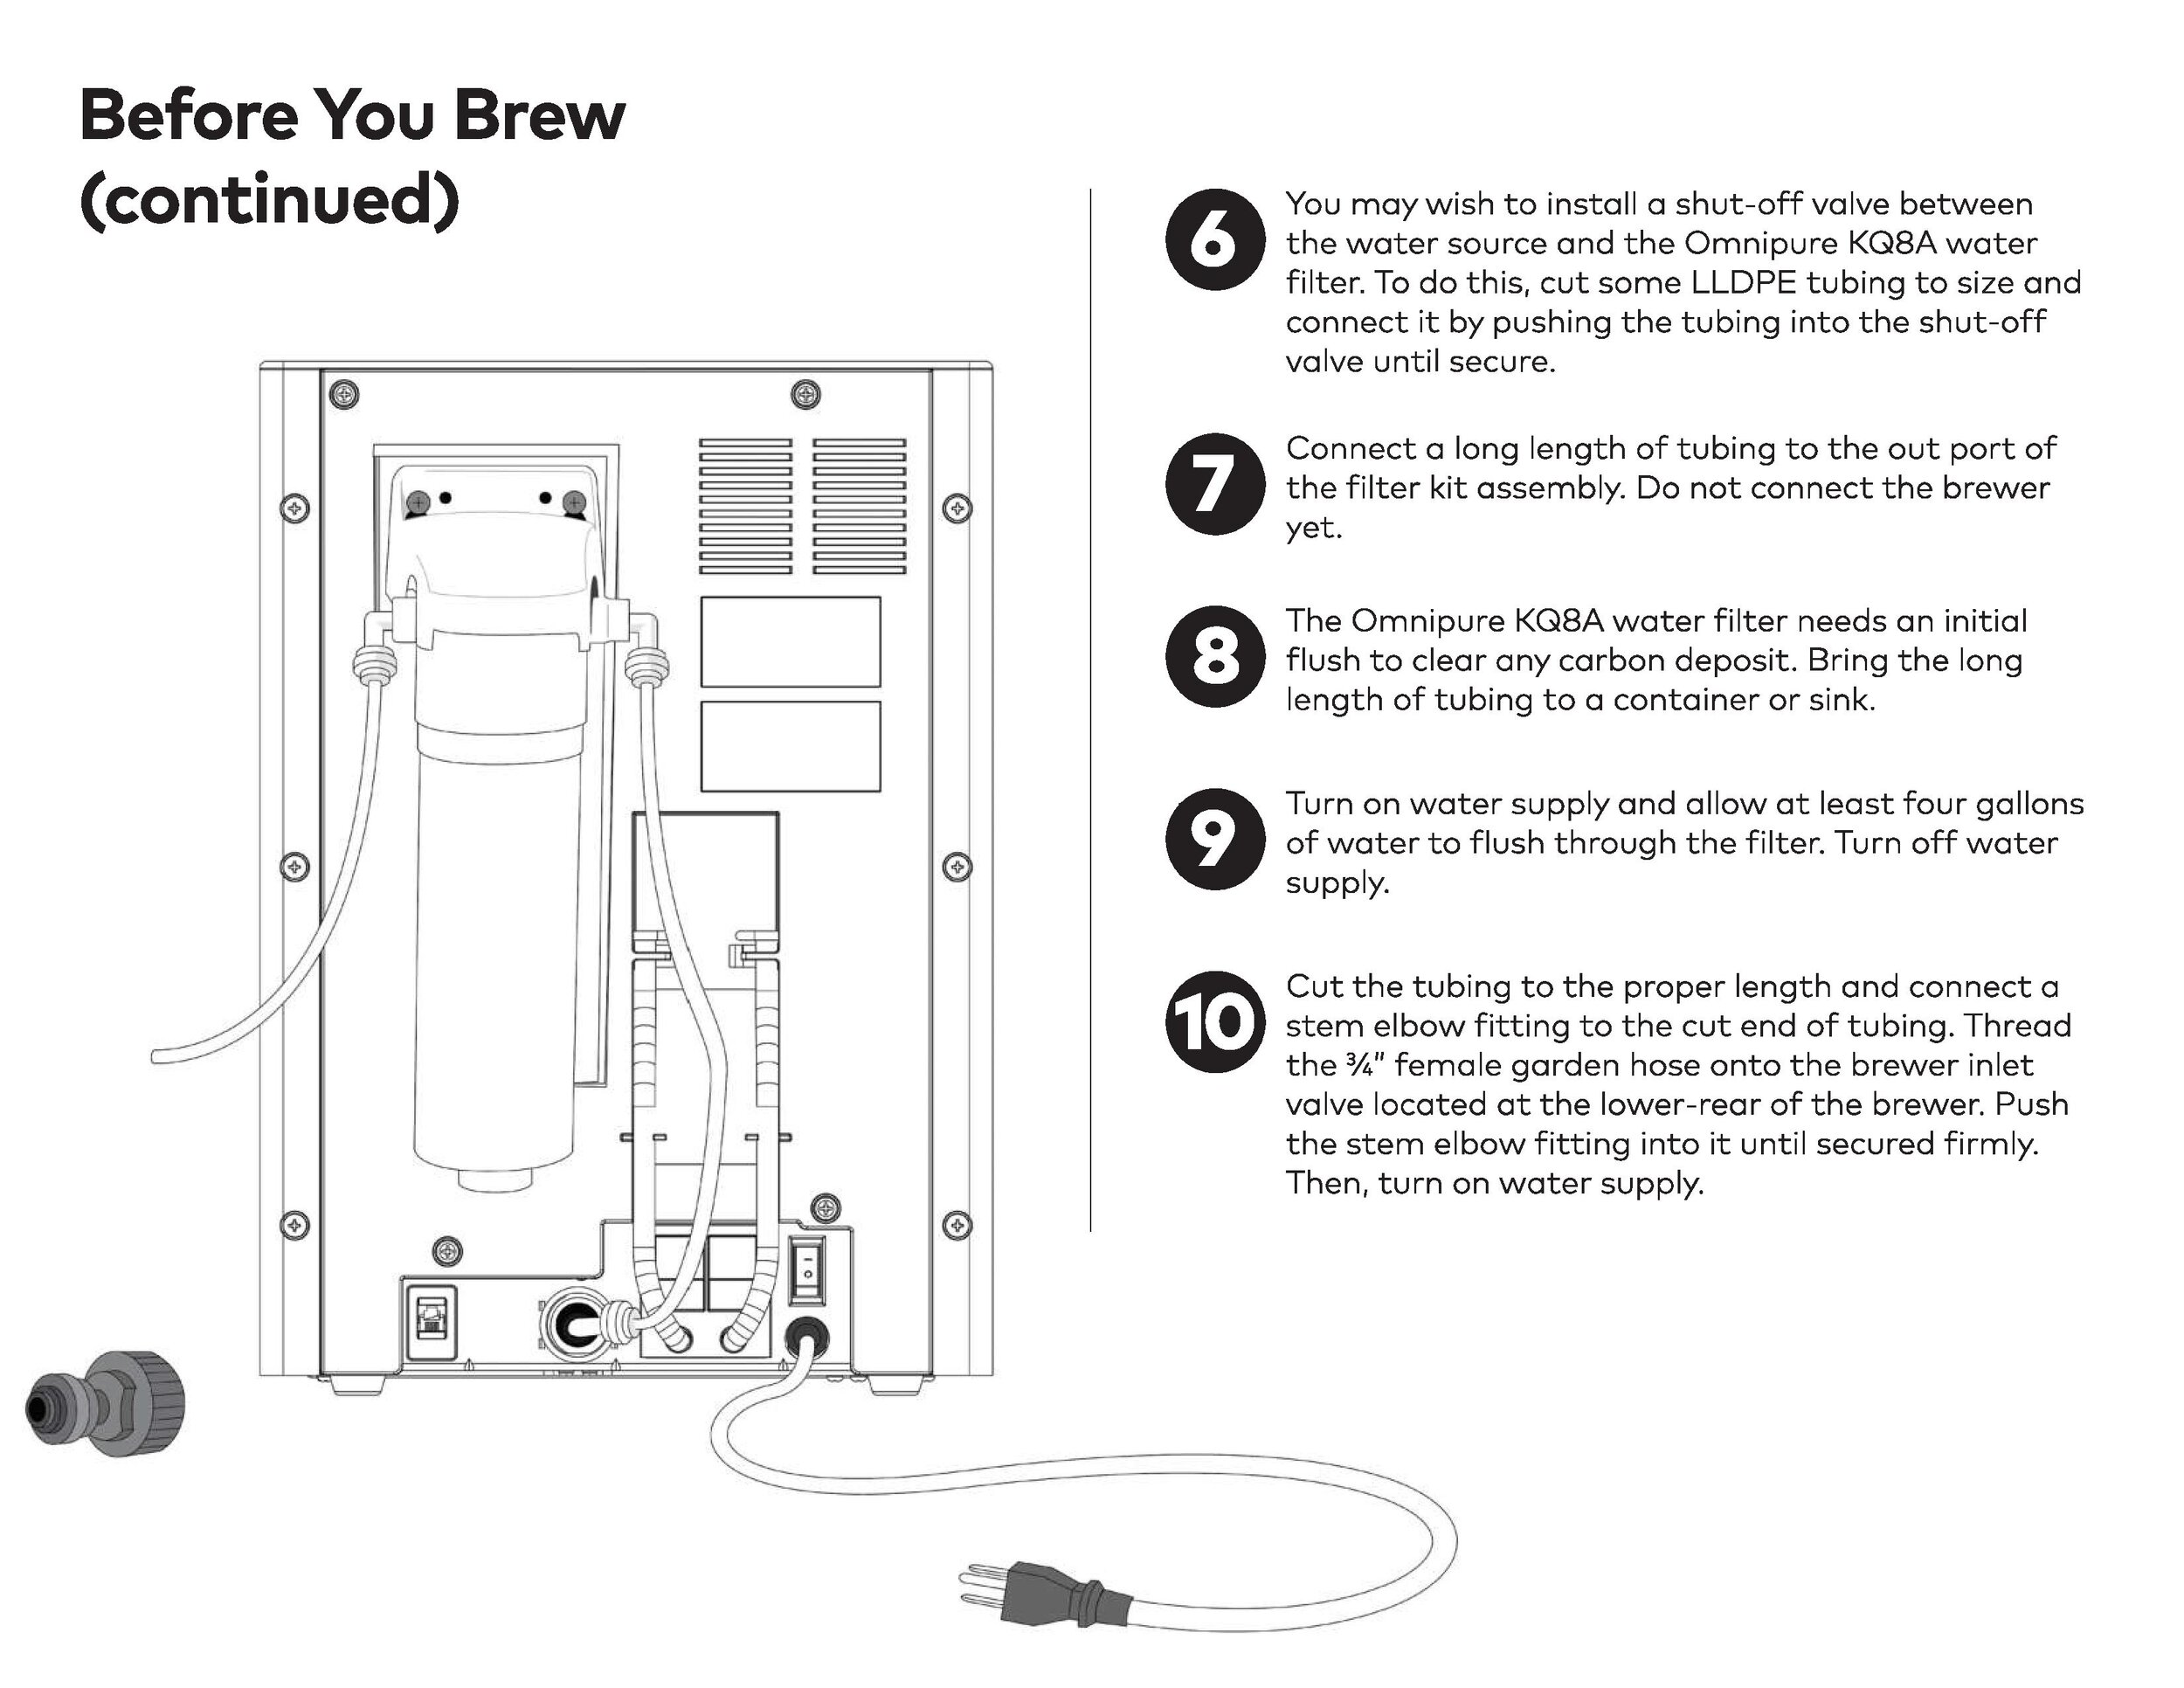 Before You Brew (continued)